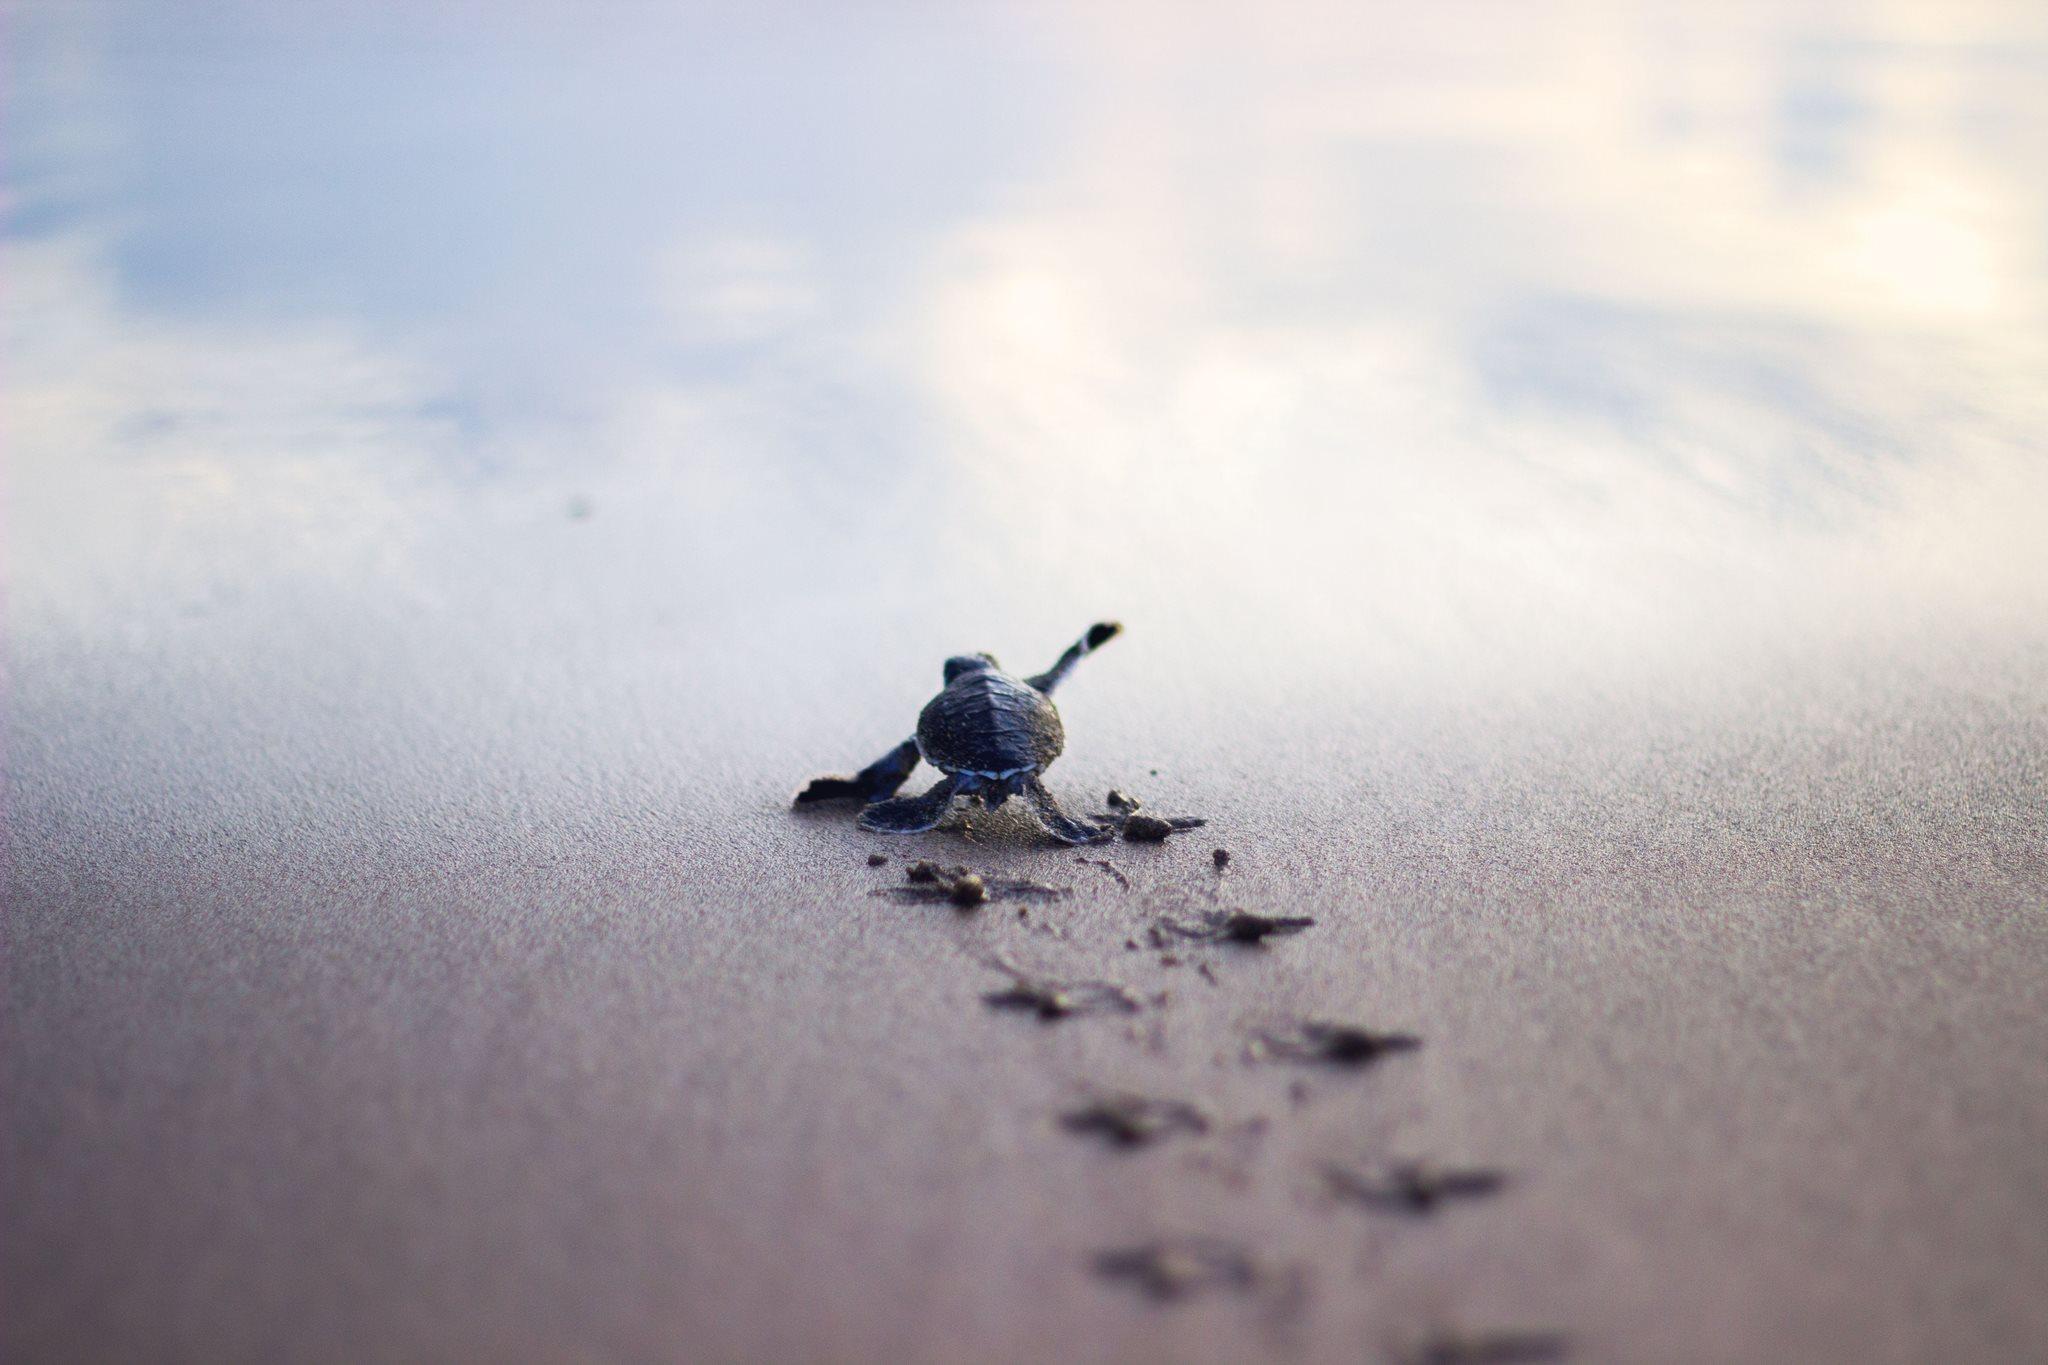 Baby turtle running to the safety of the sea shore